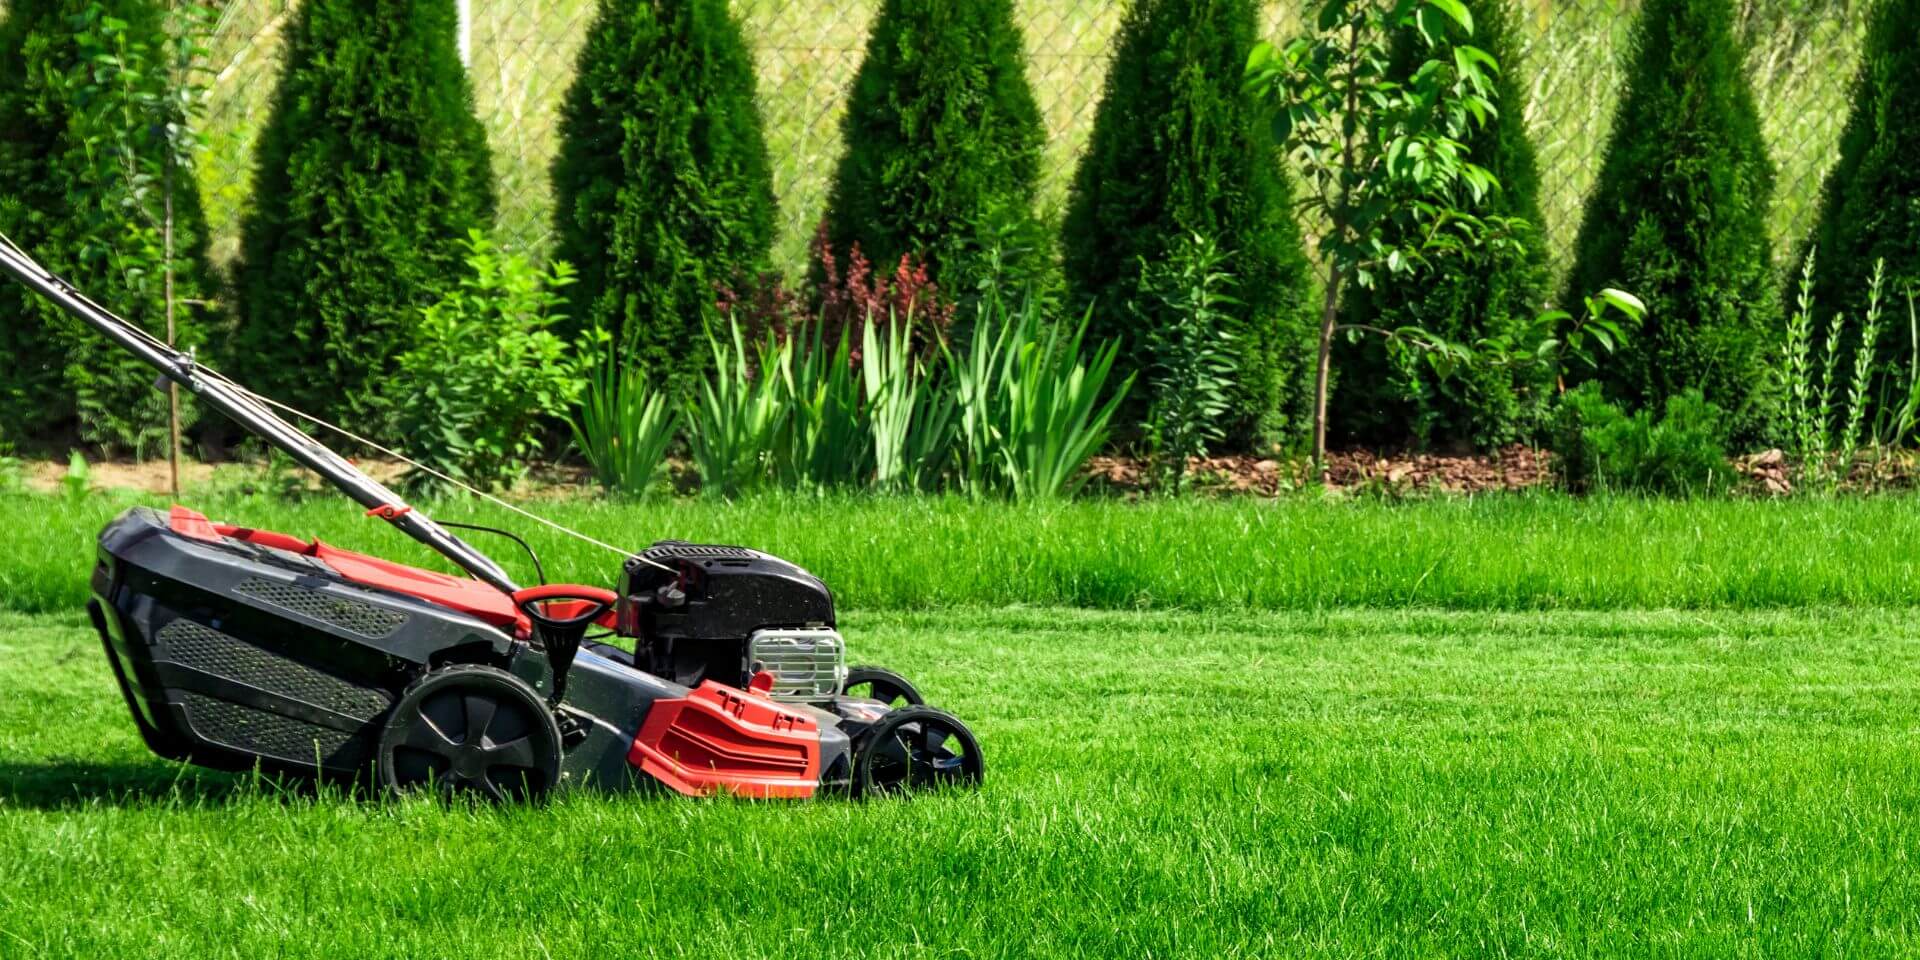 Push lawnmower being used to cut grass during summer